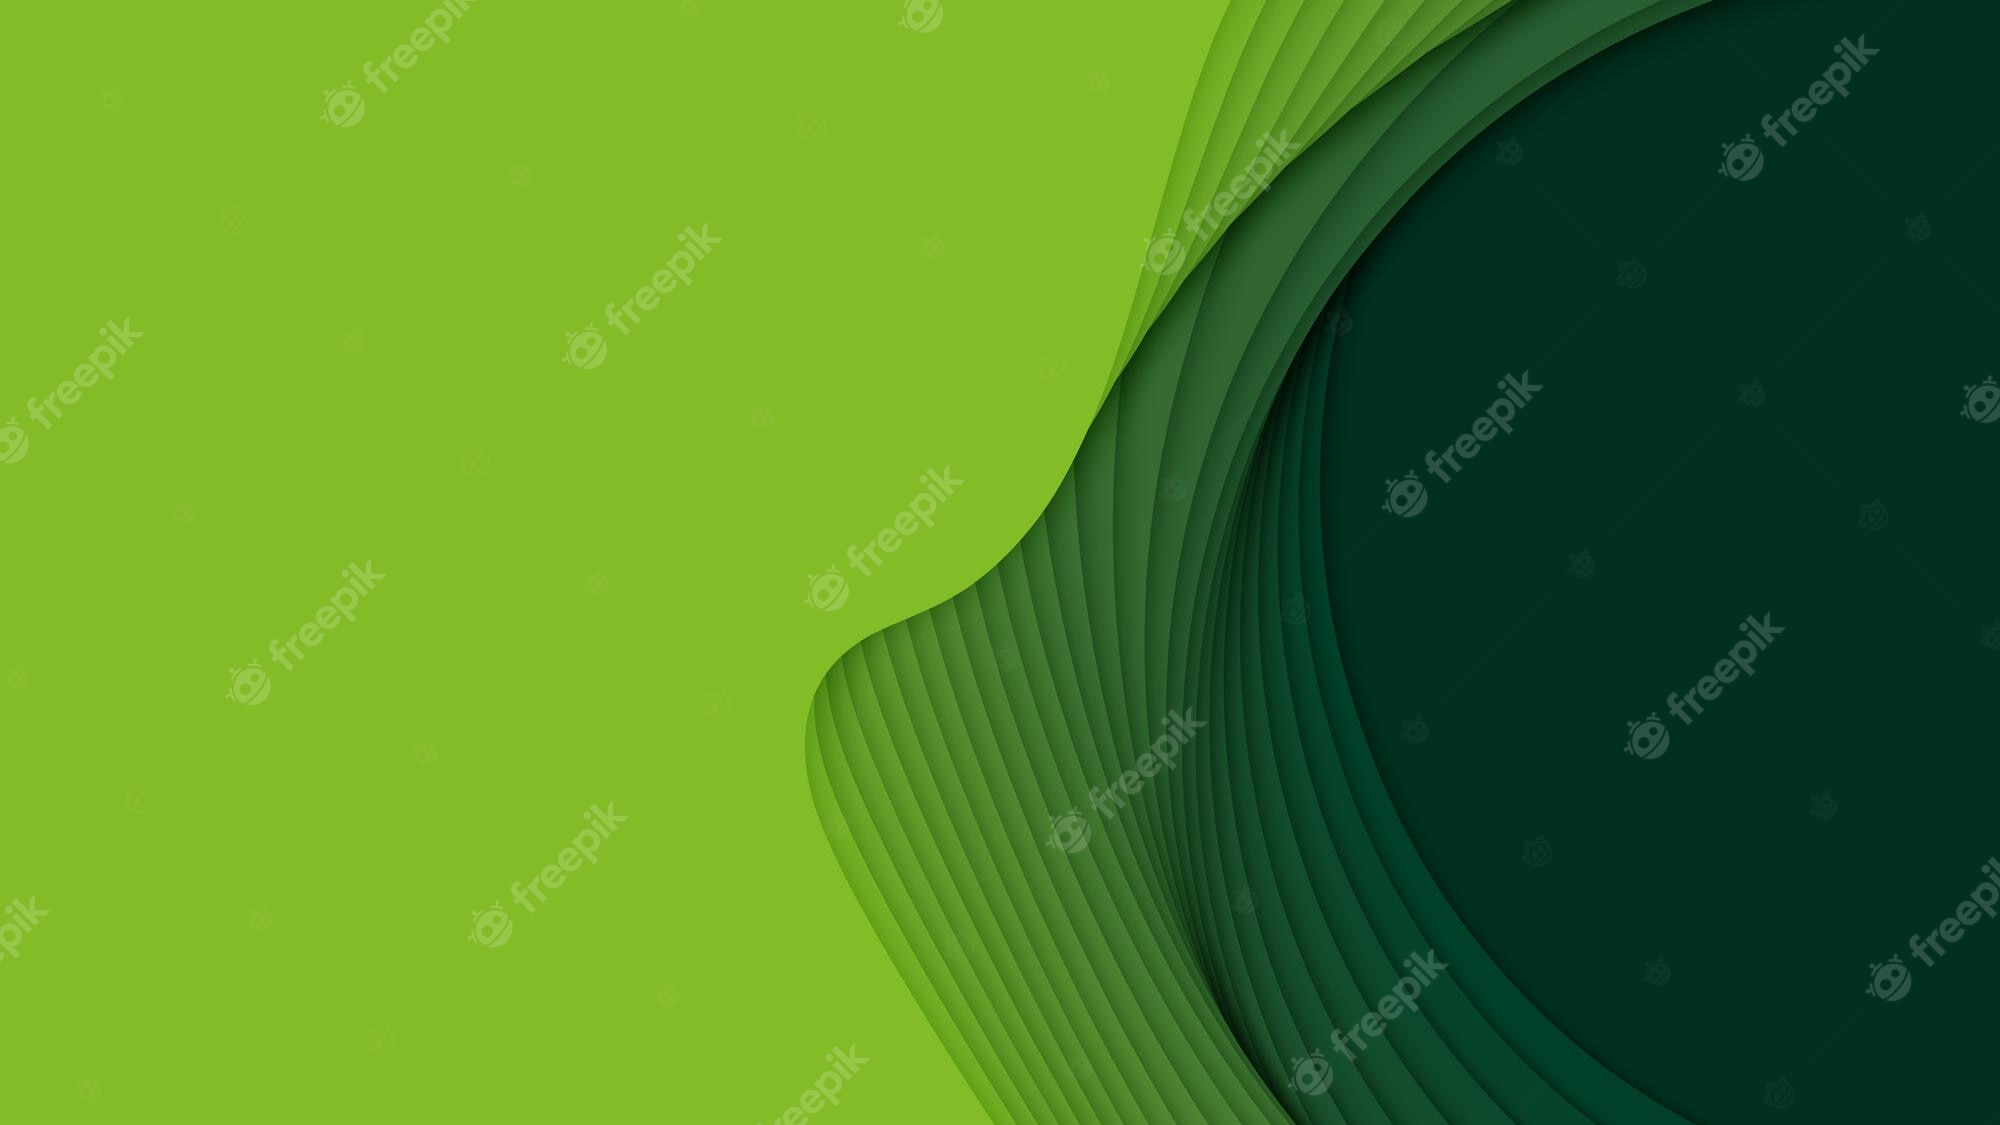 Green Color Images Hd Wallpapers